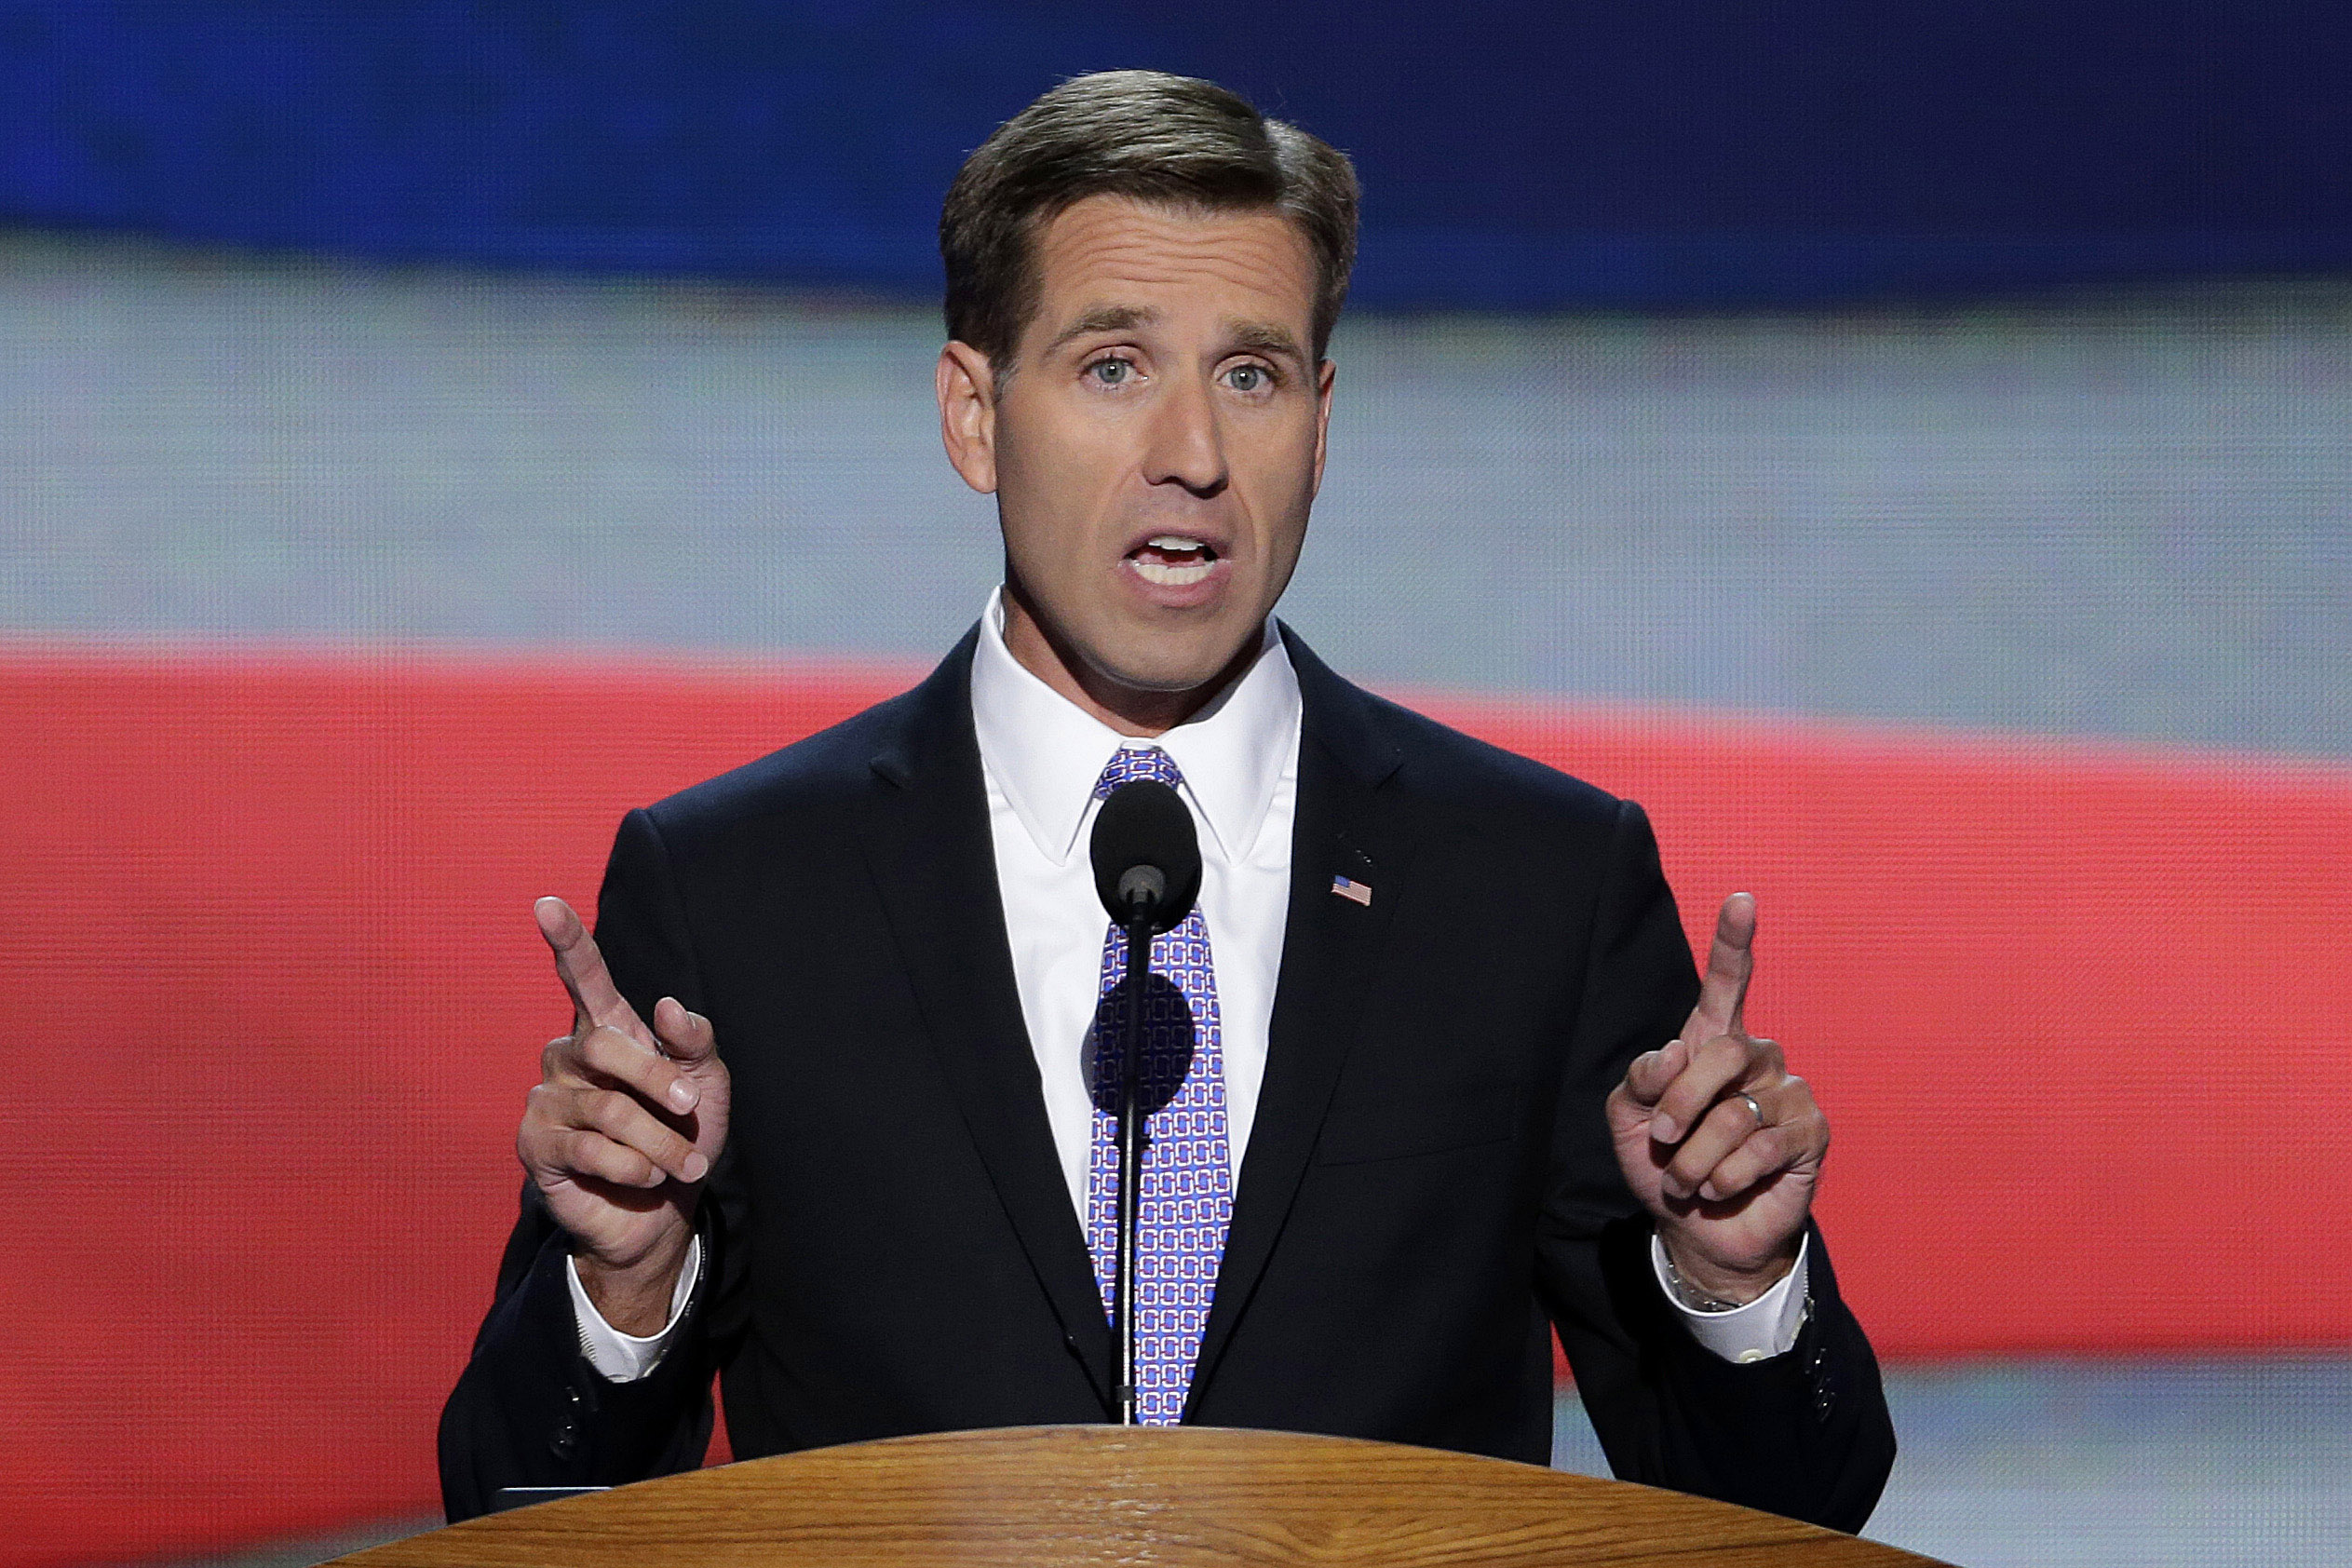 PHOTO: Beau Biden, son of Vice President Joe Biden, nominates his father for the Office of Vice Presdient of the United States during the Democratic National Convention in Charlotte, N.C., September 6, 2012.